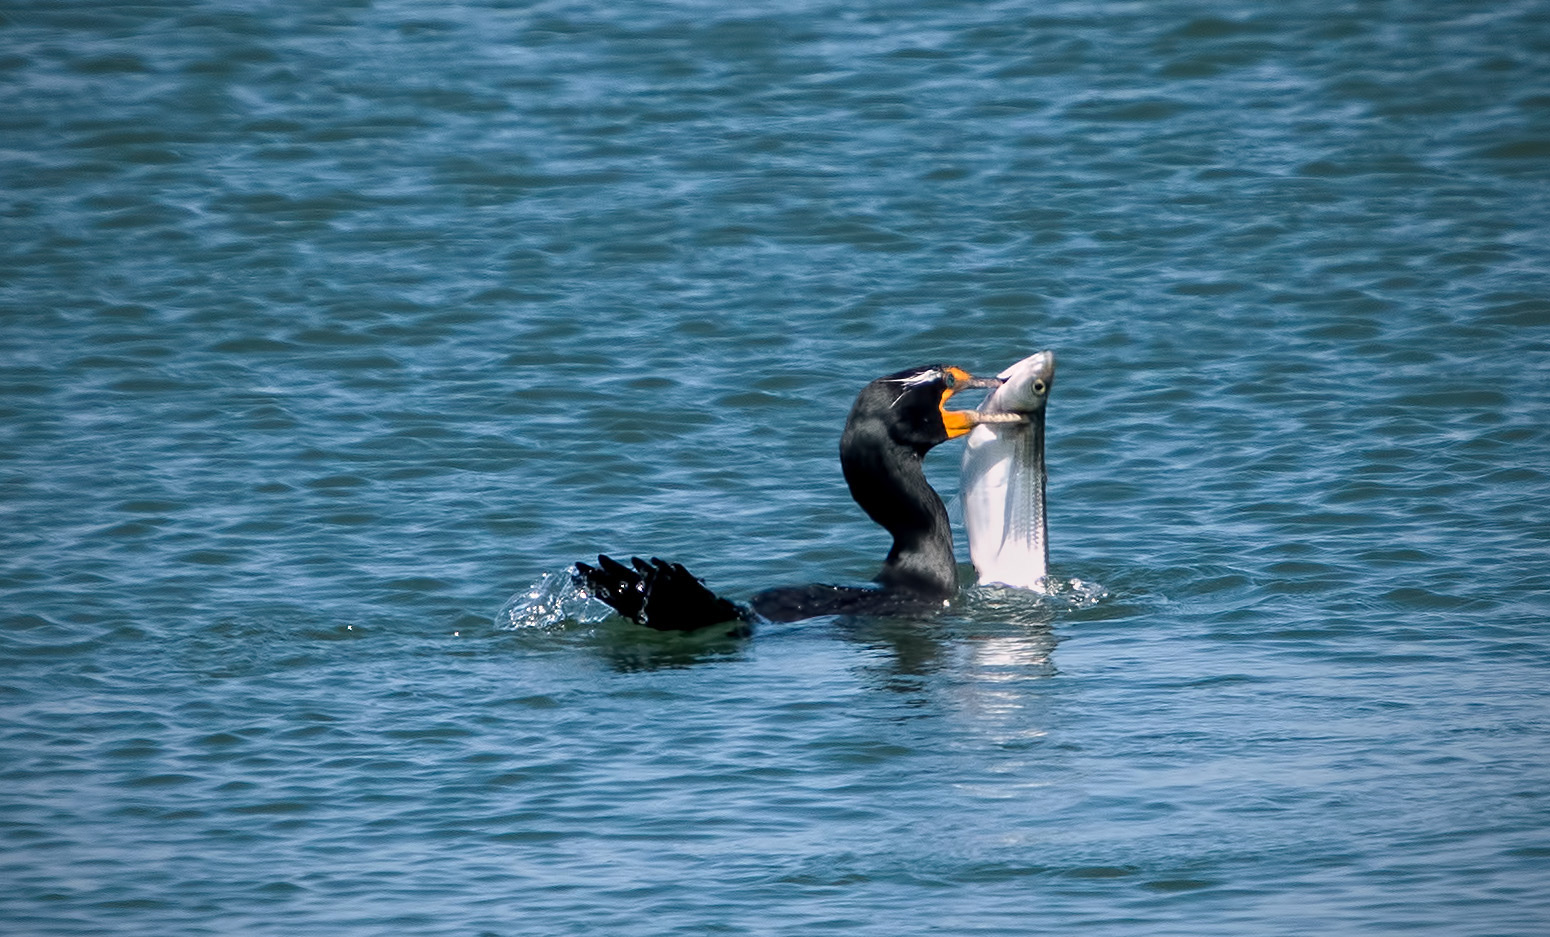 A double-crested cormorant (Phalacrocorax auritus) eat an average of one pound of fish per day. They prey on many species of fish but concentrate on those that are easiest to catch.